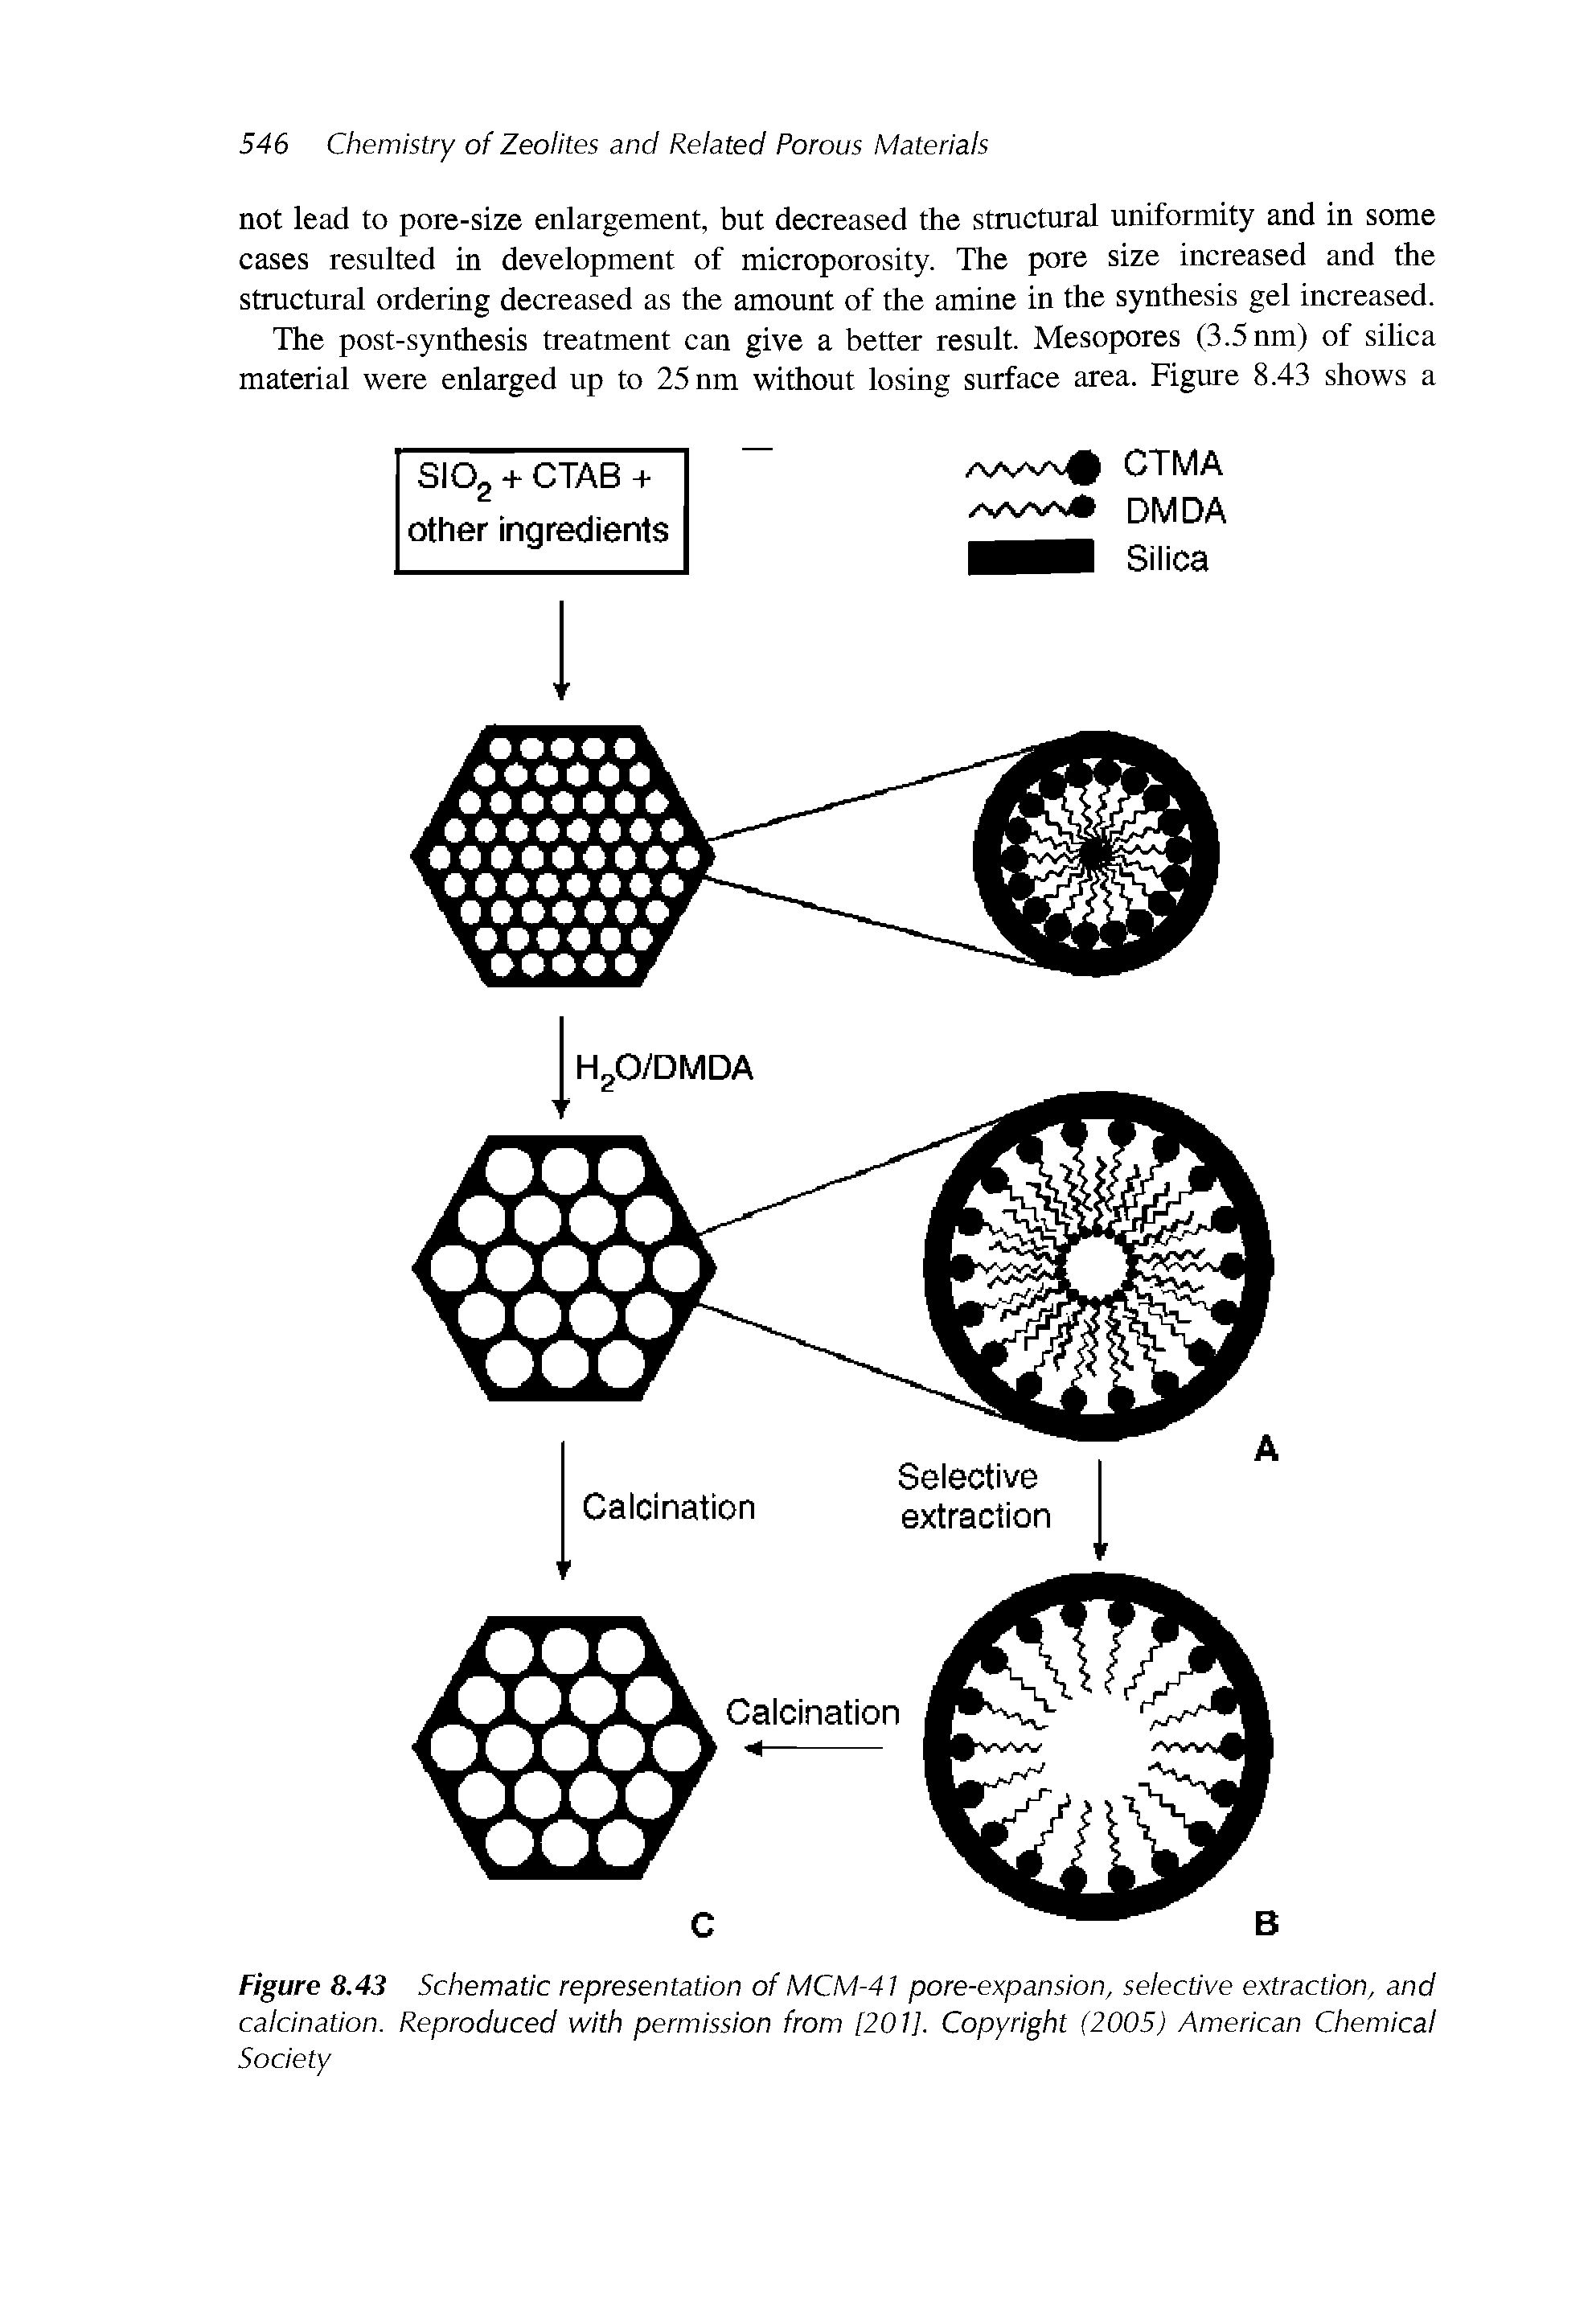 Figure 8.43 Schematic representation of MCM-41 pore-expansion, selective extraction, and calcination. Reproduced with permission from [201]. Copyright (2005) American Chemical Society...